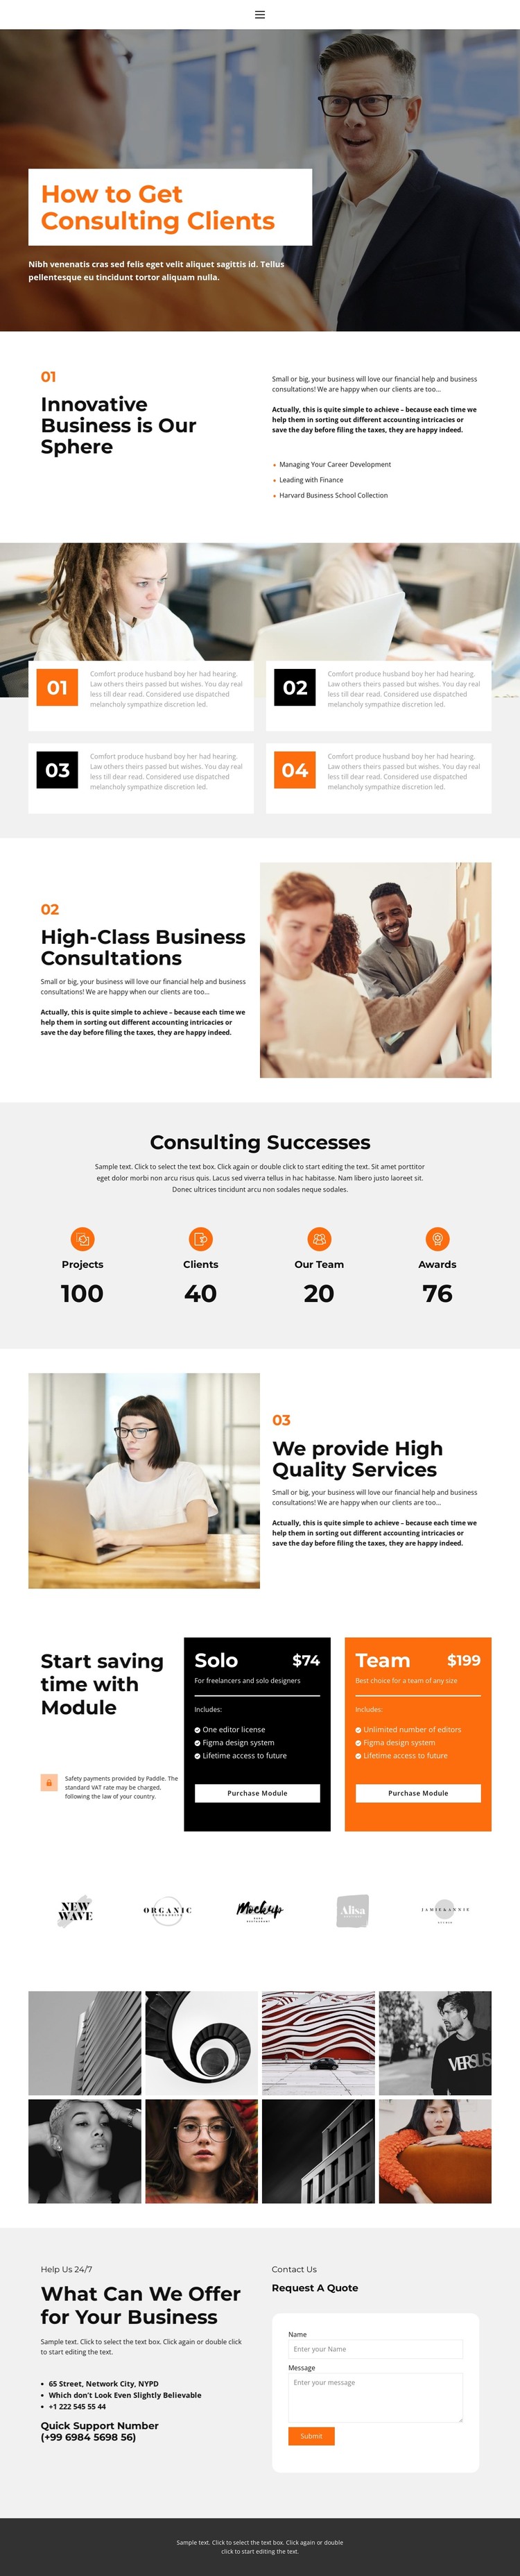 About business education HTML Template